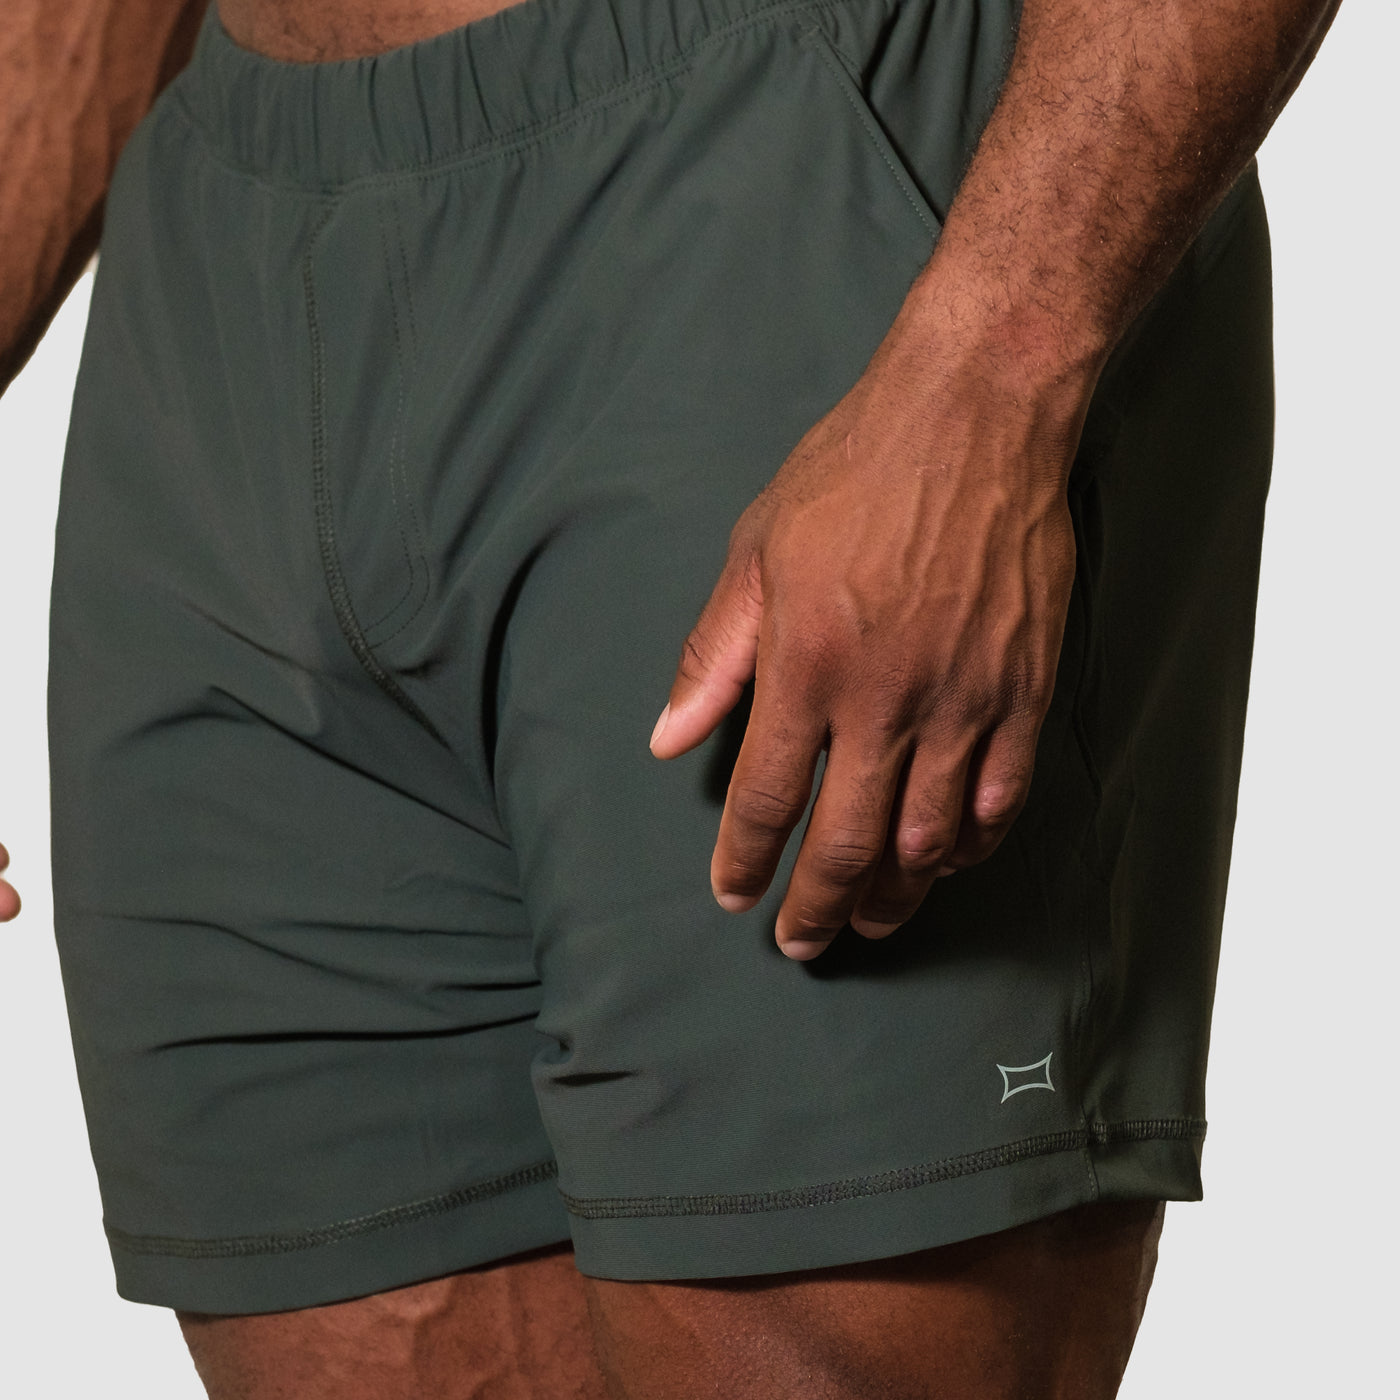 Tempo Shorts - OUTLET